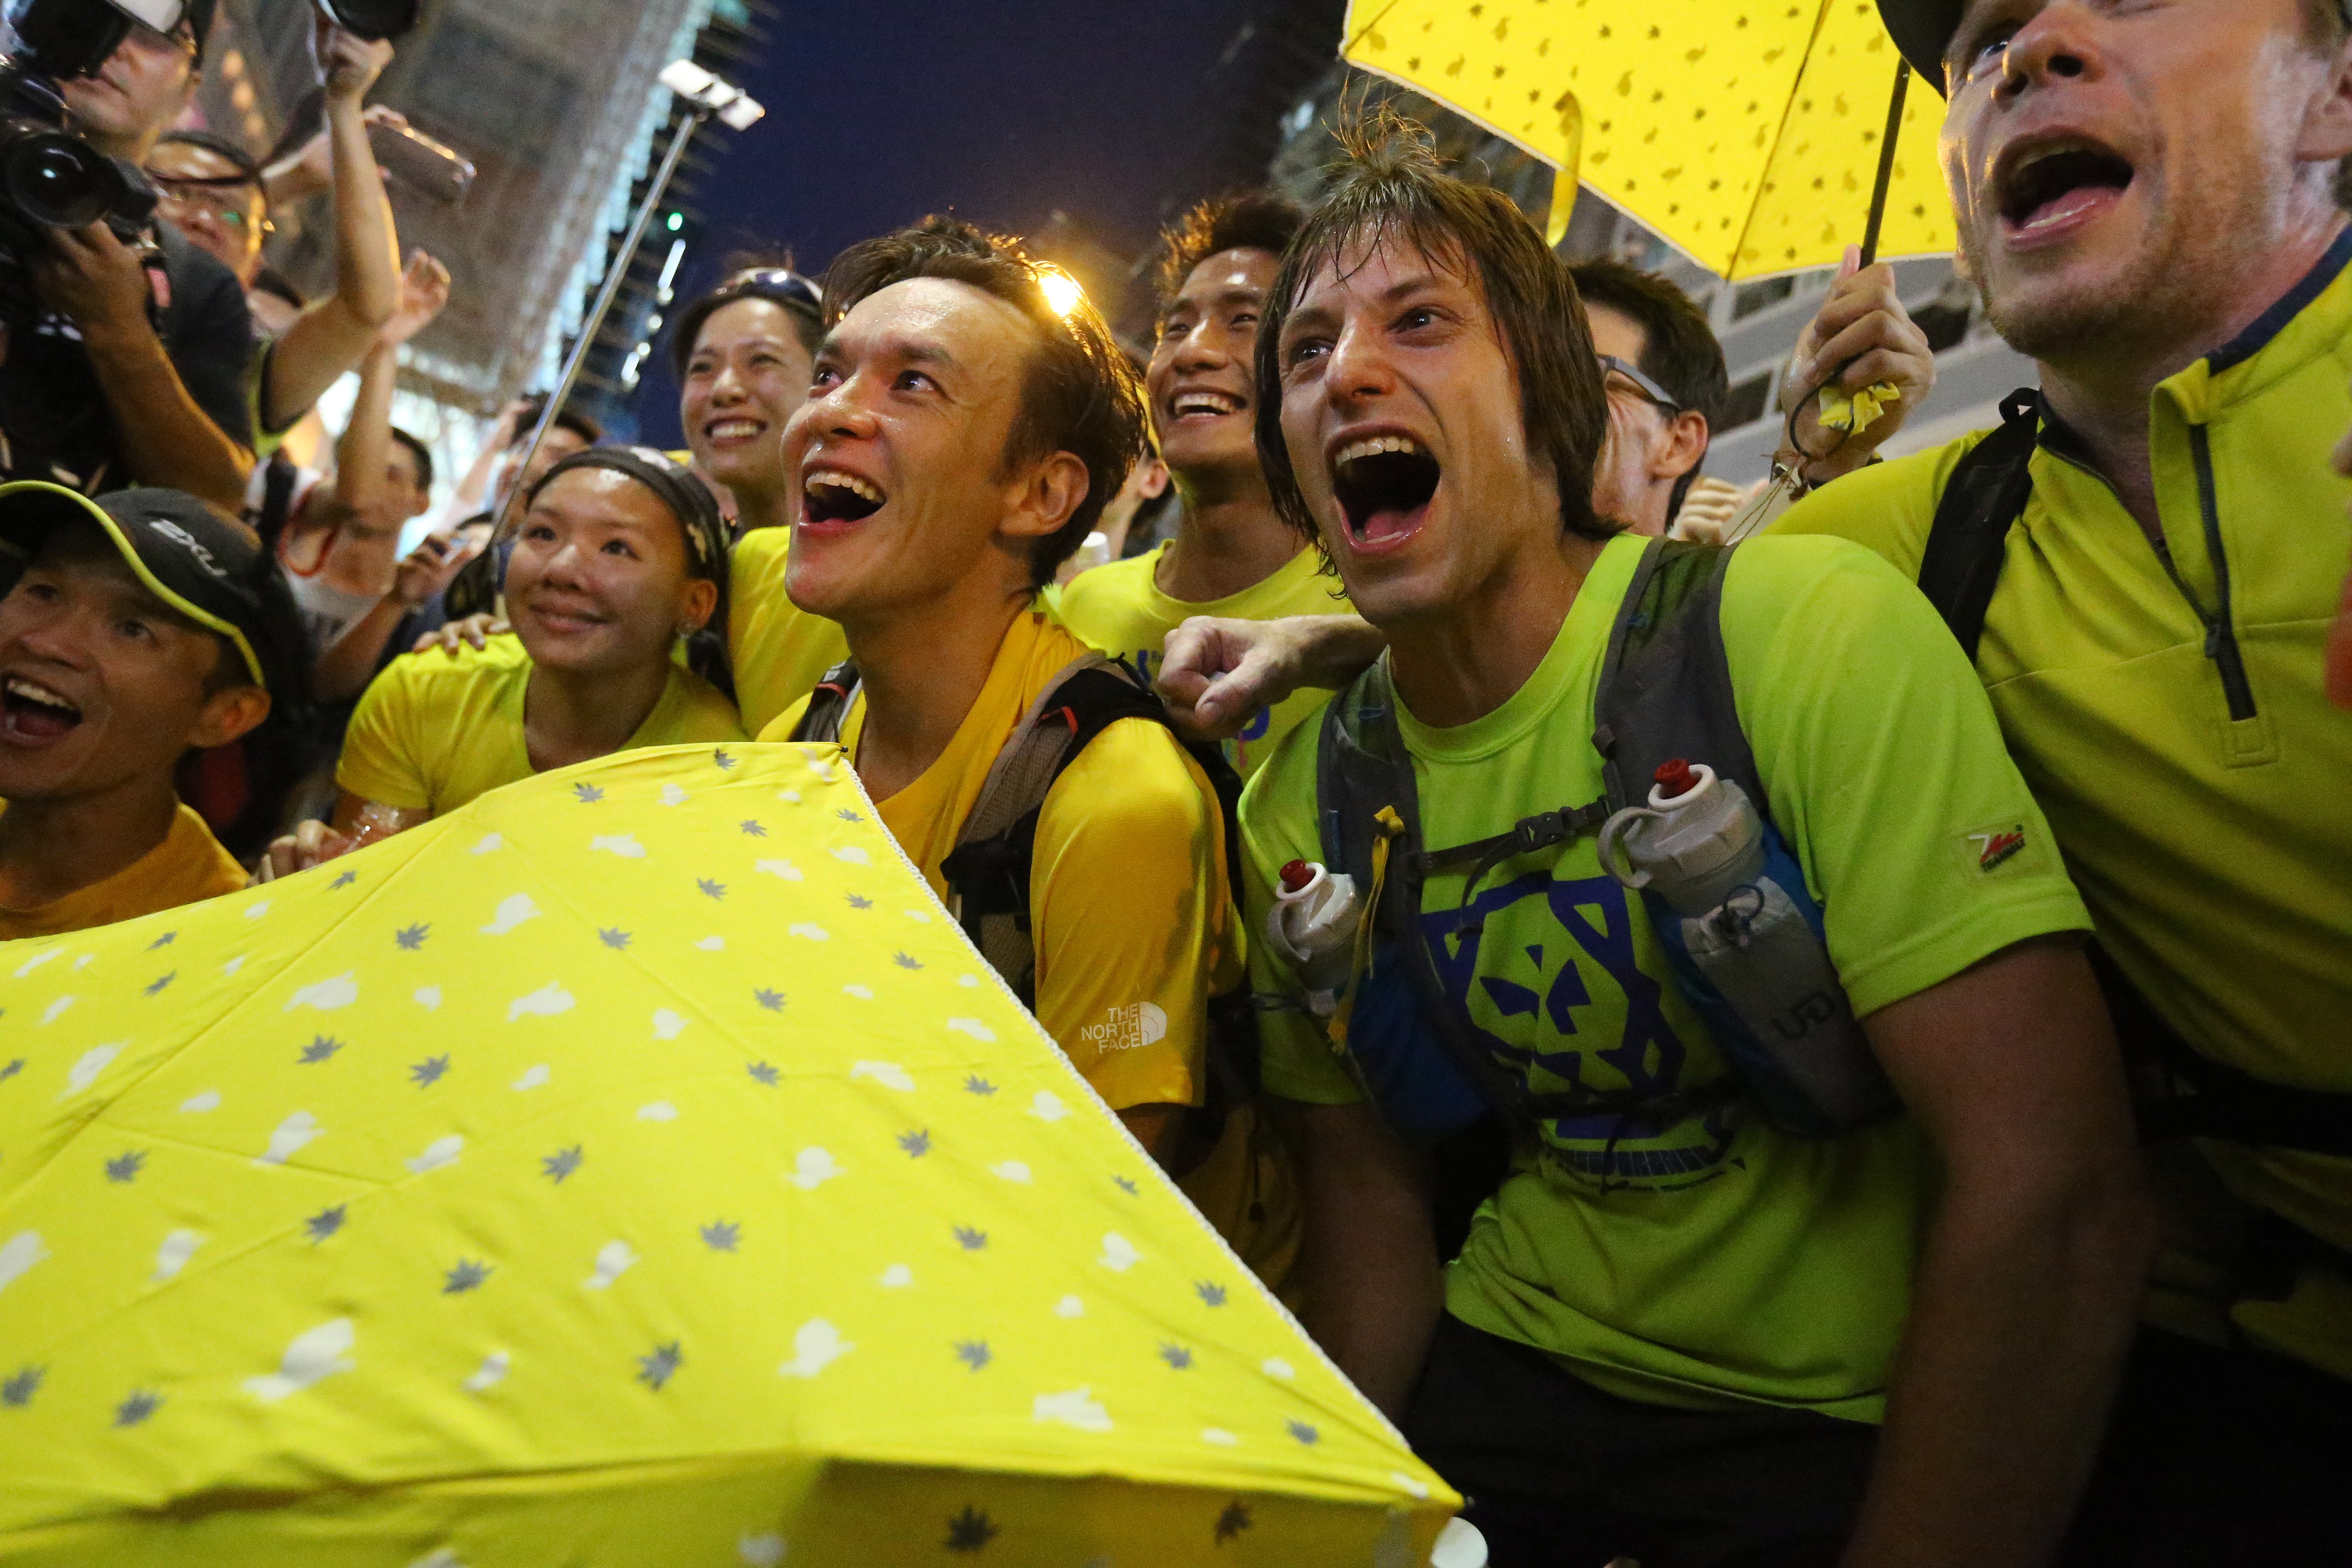 John Ellis (left) and Andrew Dawson arrive at Mong Kok as they run an ultramarathon to support pro-democracy protests in 2014. They have echoed that run for solidarity for the recent protests. Photo: K.Y. Cheng